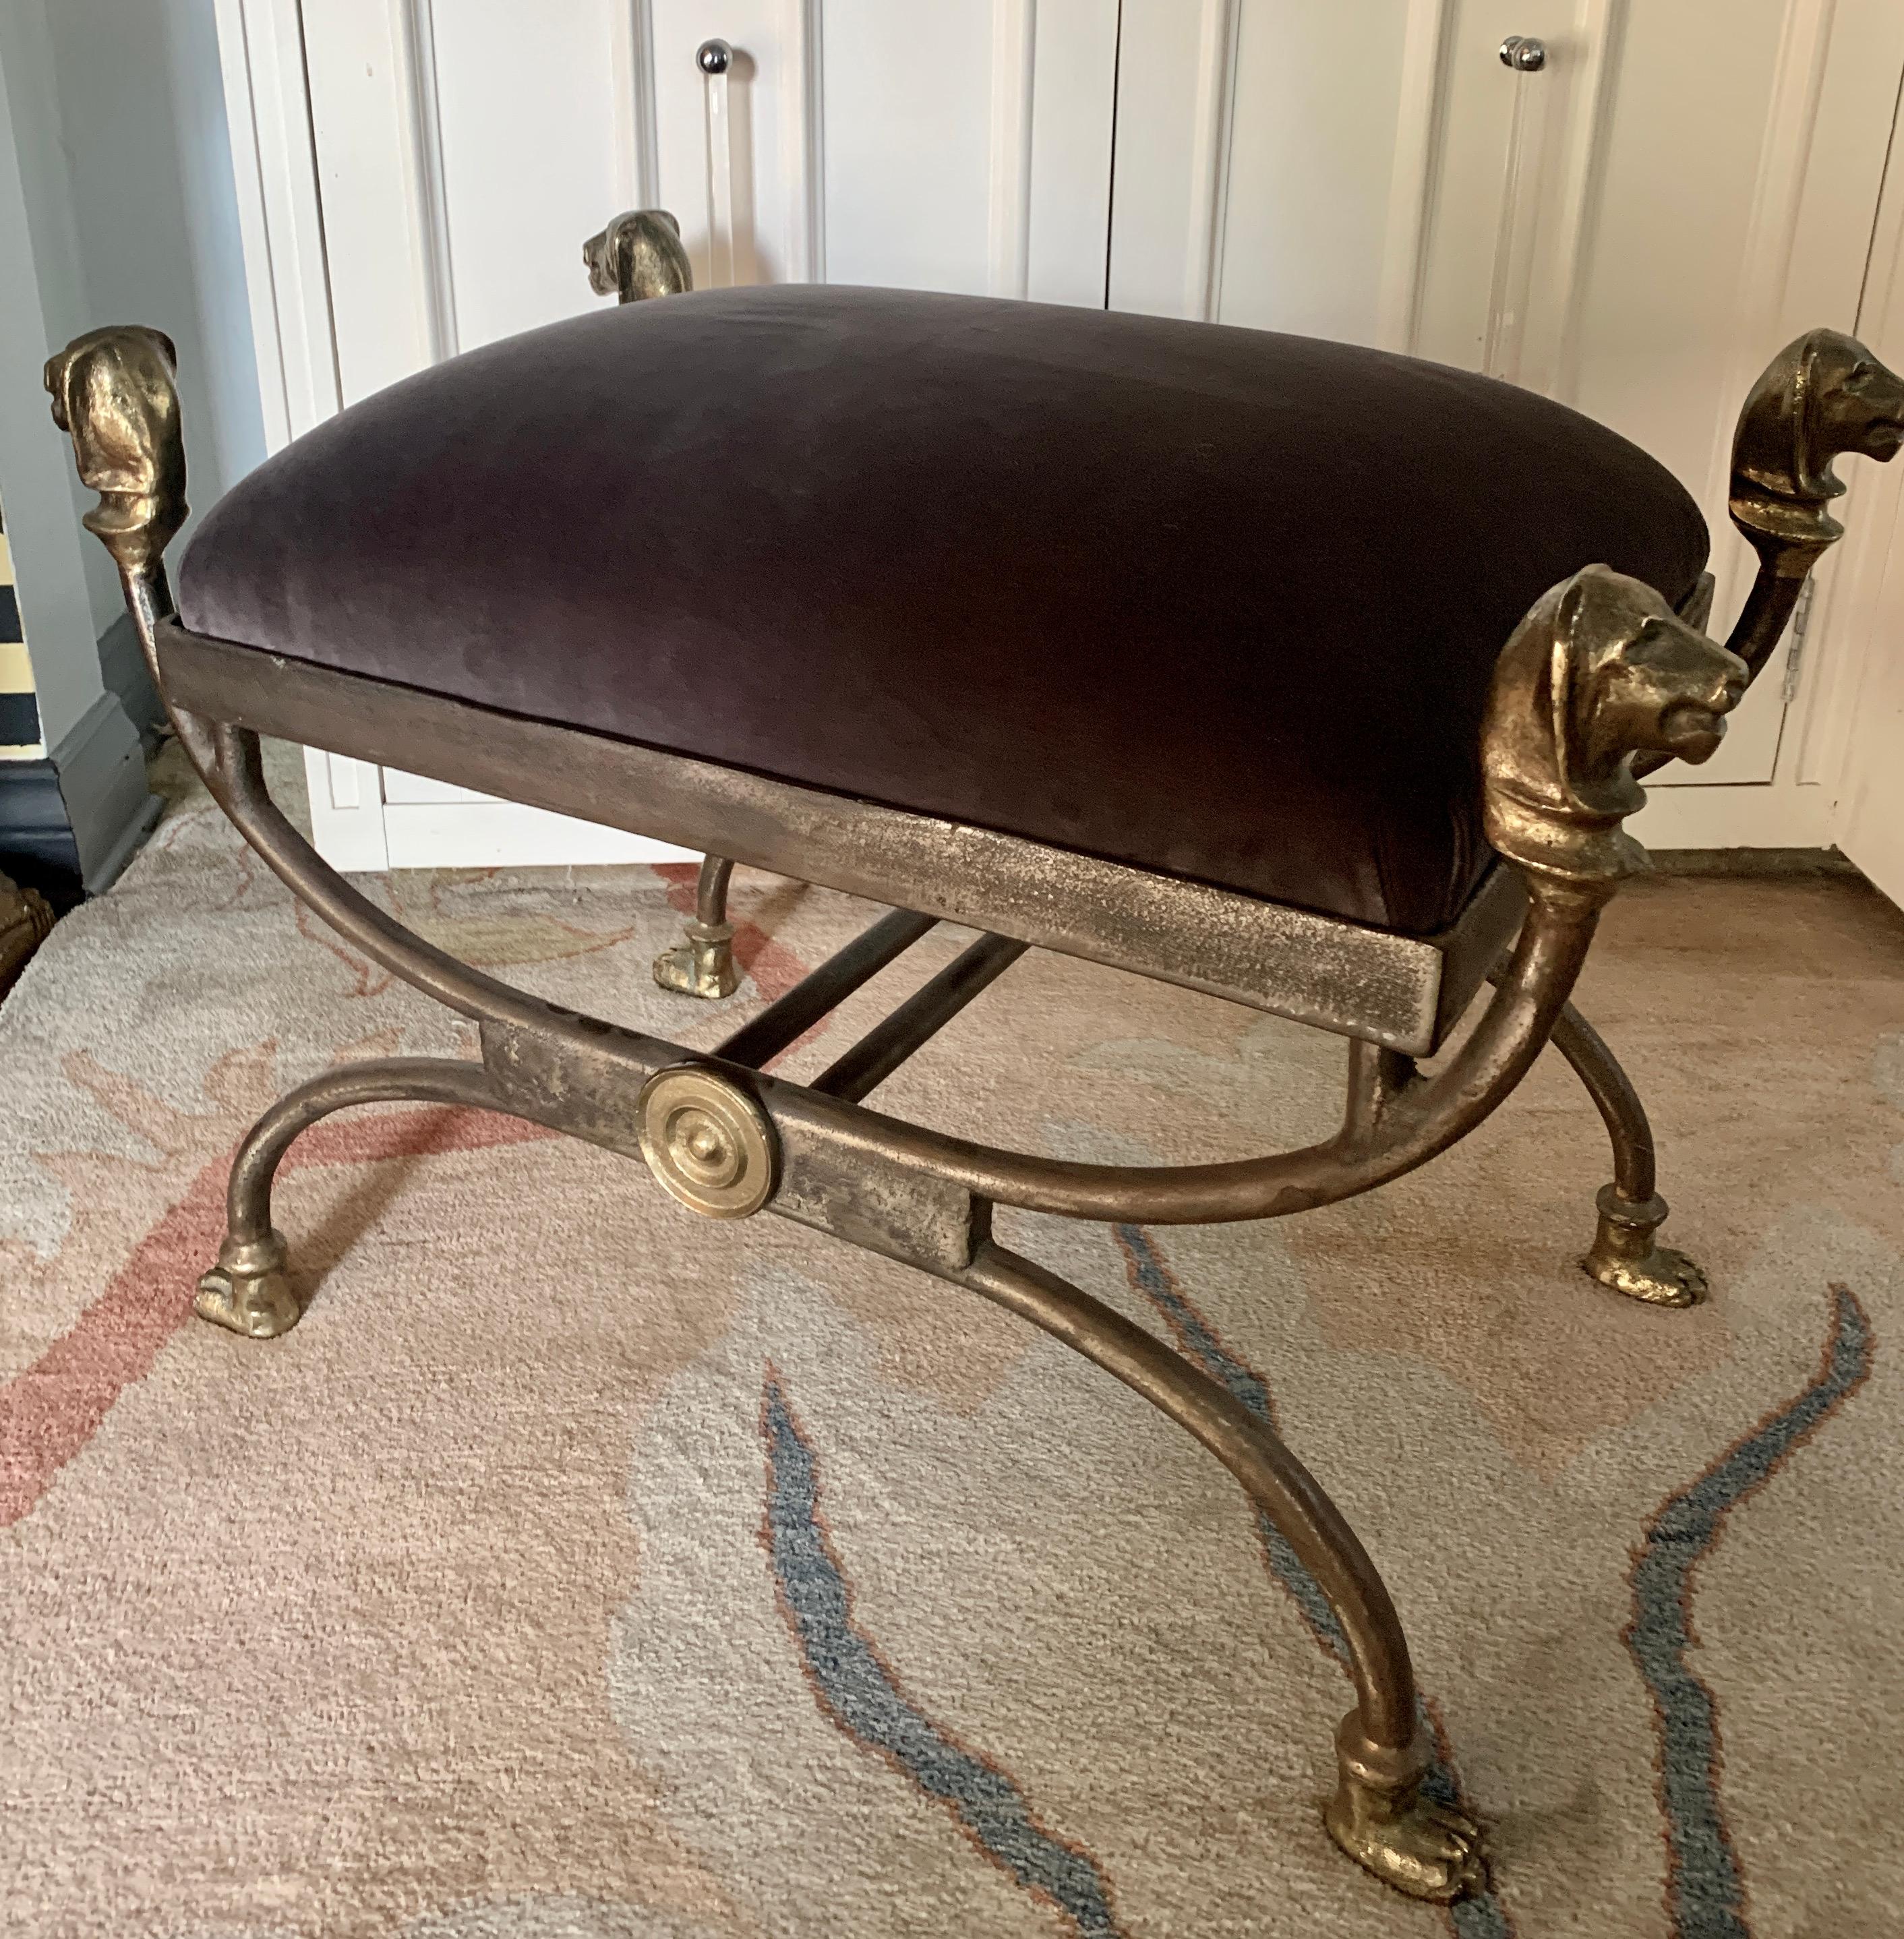 A wrought iron stool with cast bronze head finials and paw feet with side medallions. The shape and detailing are exceptional. A fabulous statement in newly upholstered Belgian Velvet. A compliment to any room, foot of the bed to library and guest